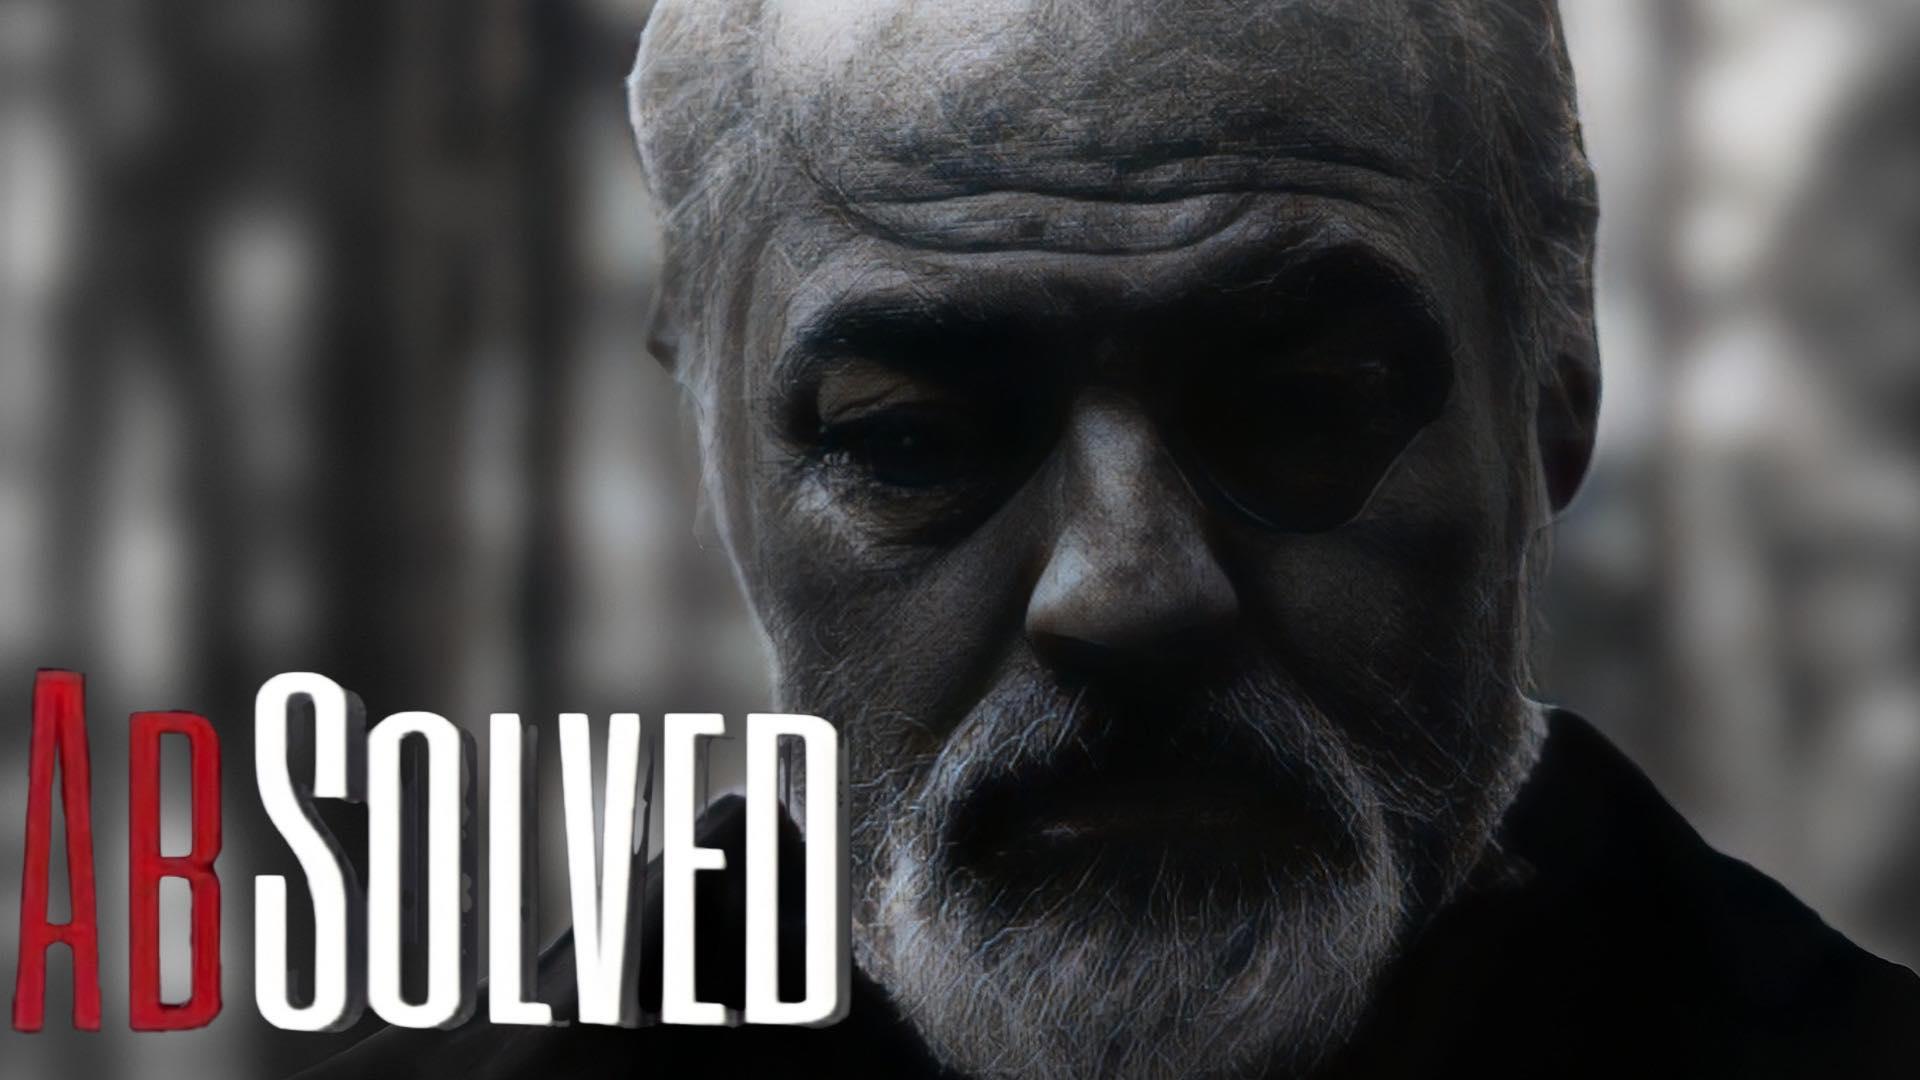 AbSolved - Ep. 5: Lincoln